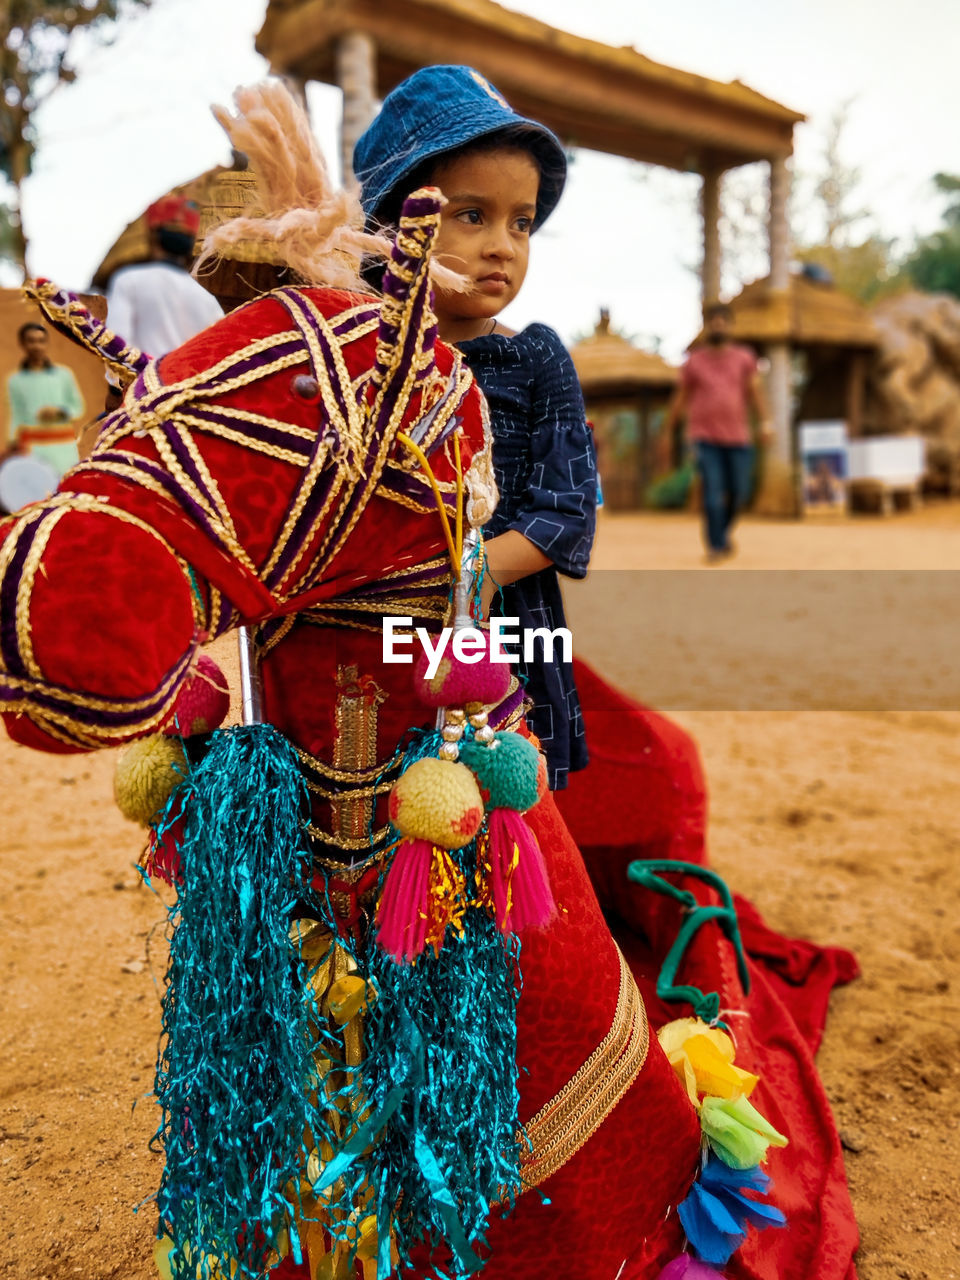 Girl looking away while sitting on artificial decorated horse